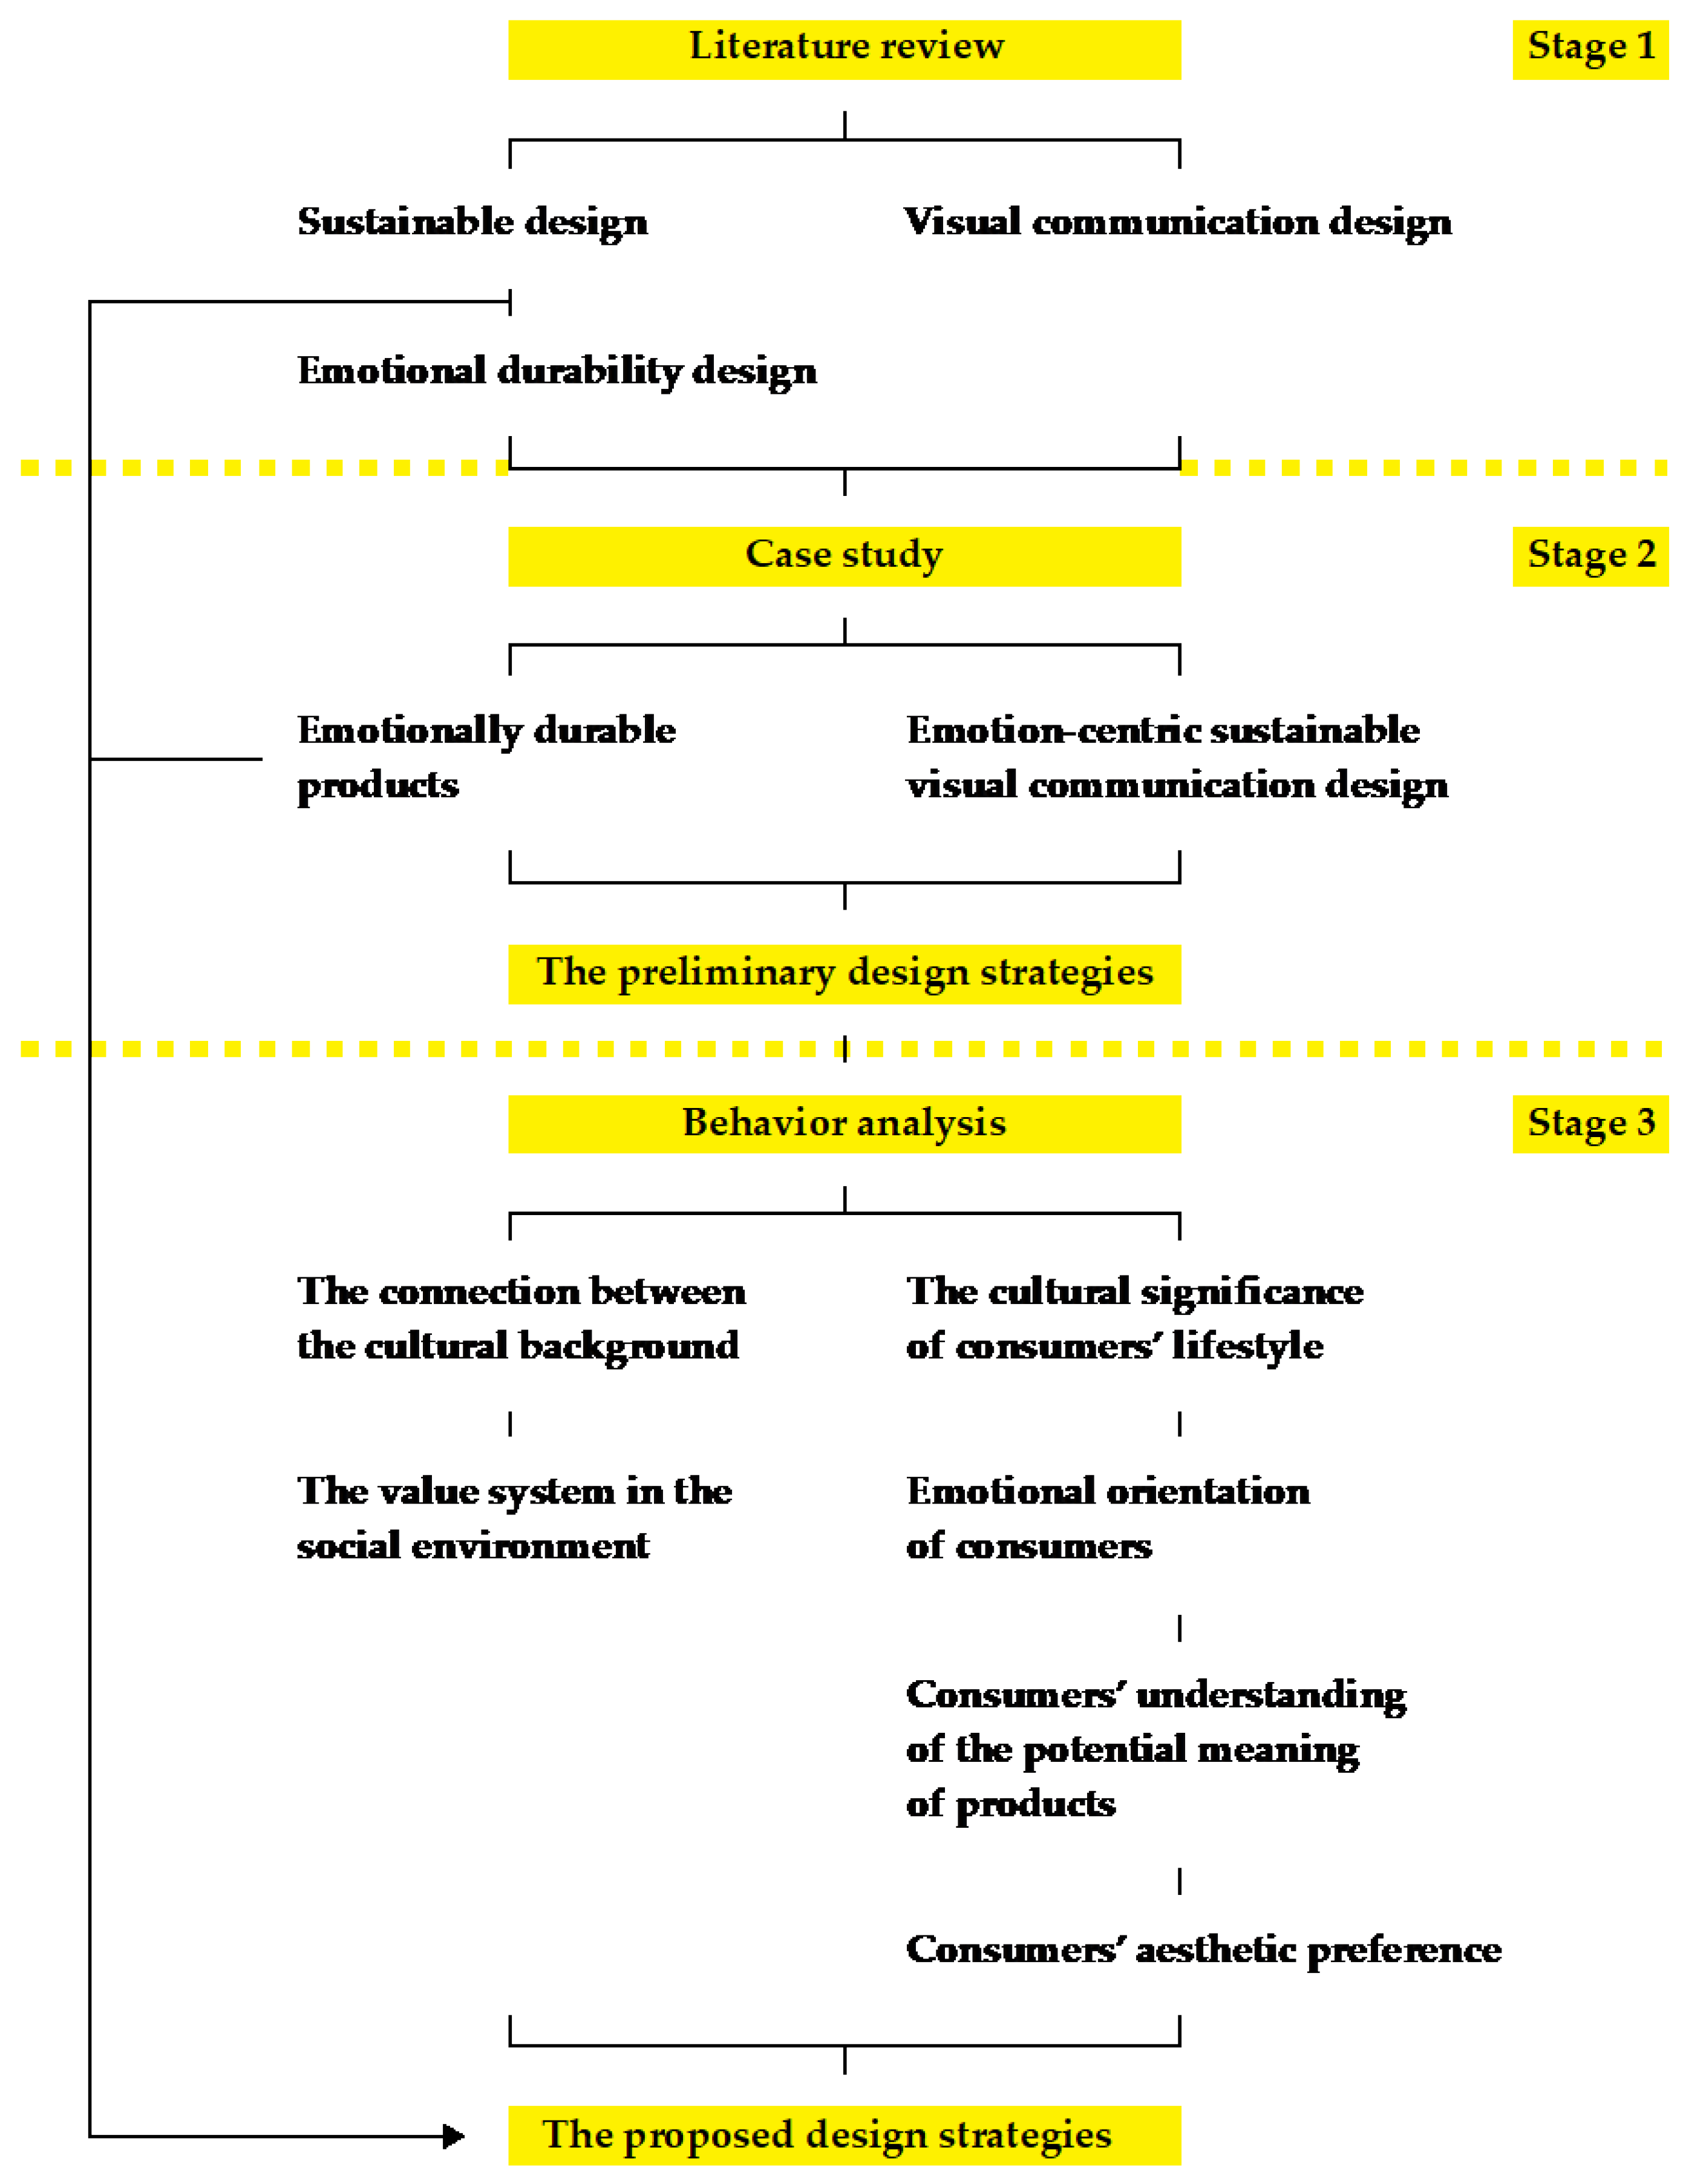 Sustainability | Free Full-Text | Aesthetics of Sustainability: Research on  the Design Strategies for Emotionally Durable Visual Communication Design